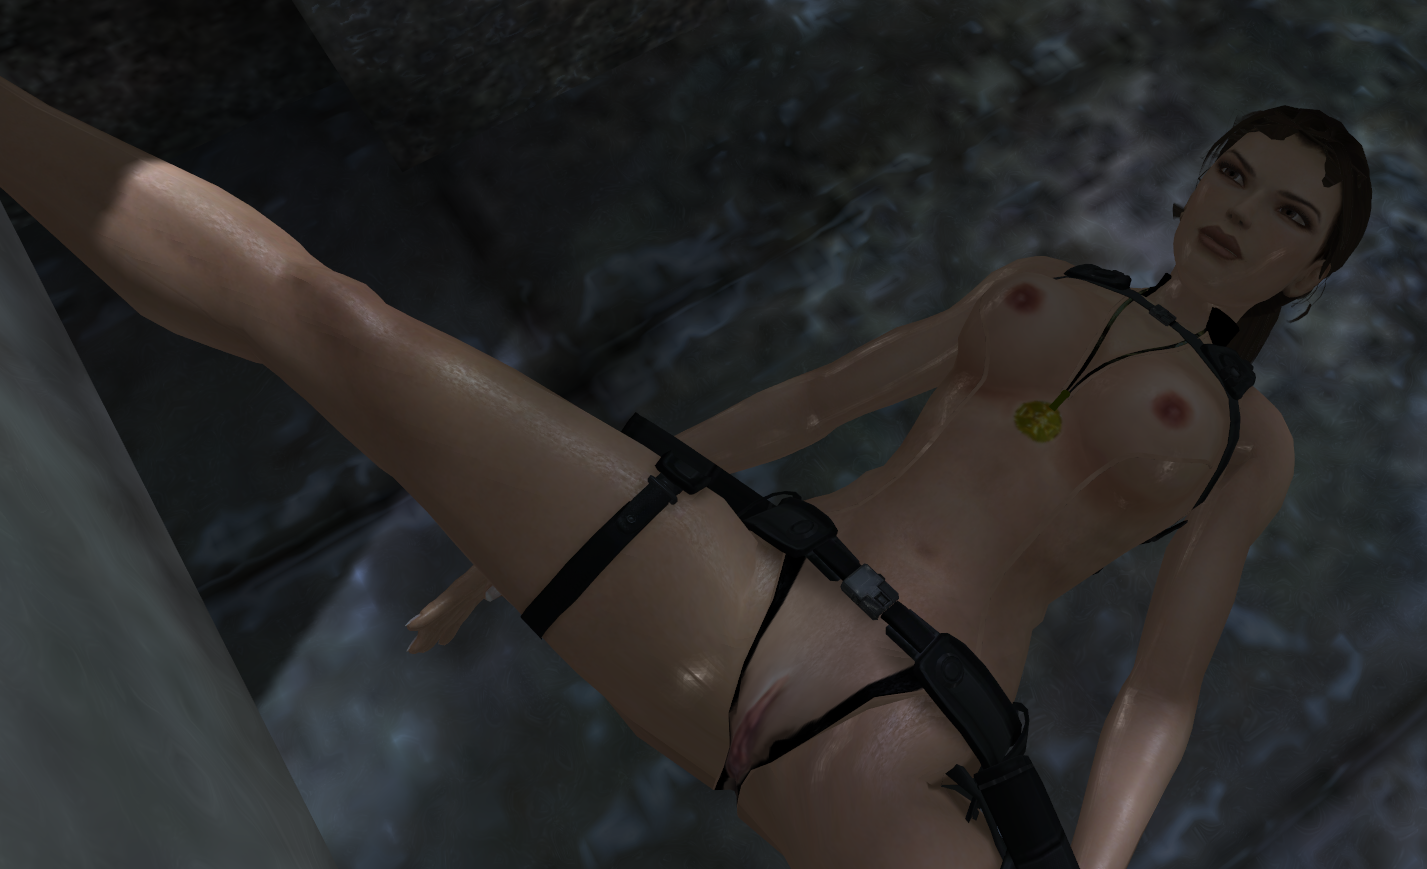 Attached a good cheat engine tool, let's Lara pose, with my nude patch...